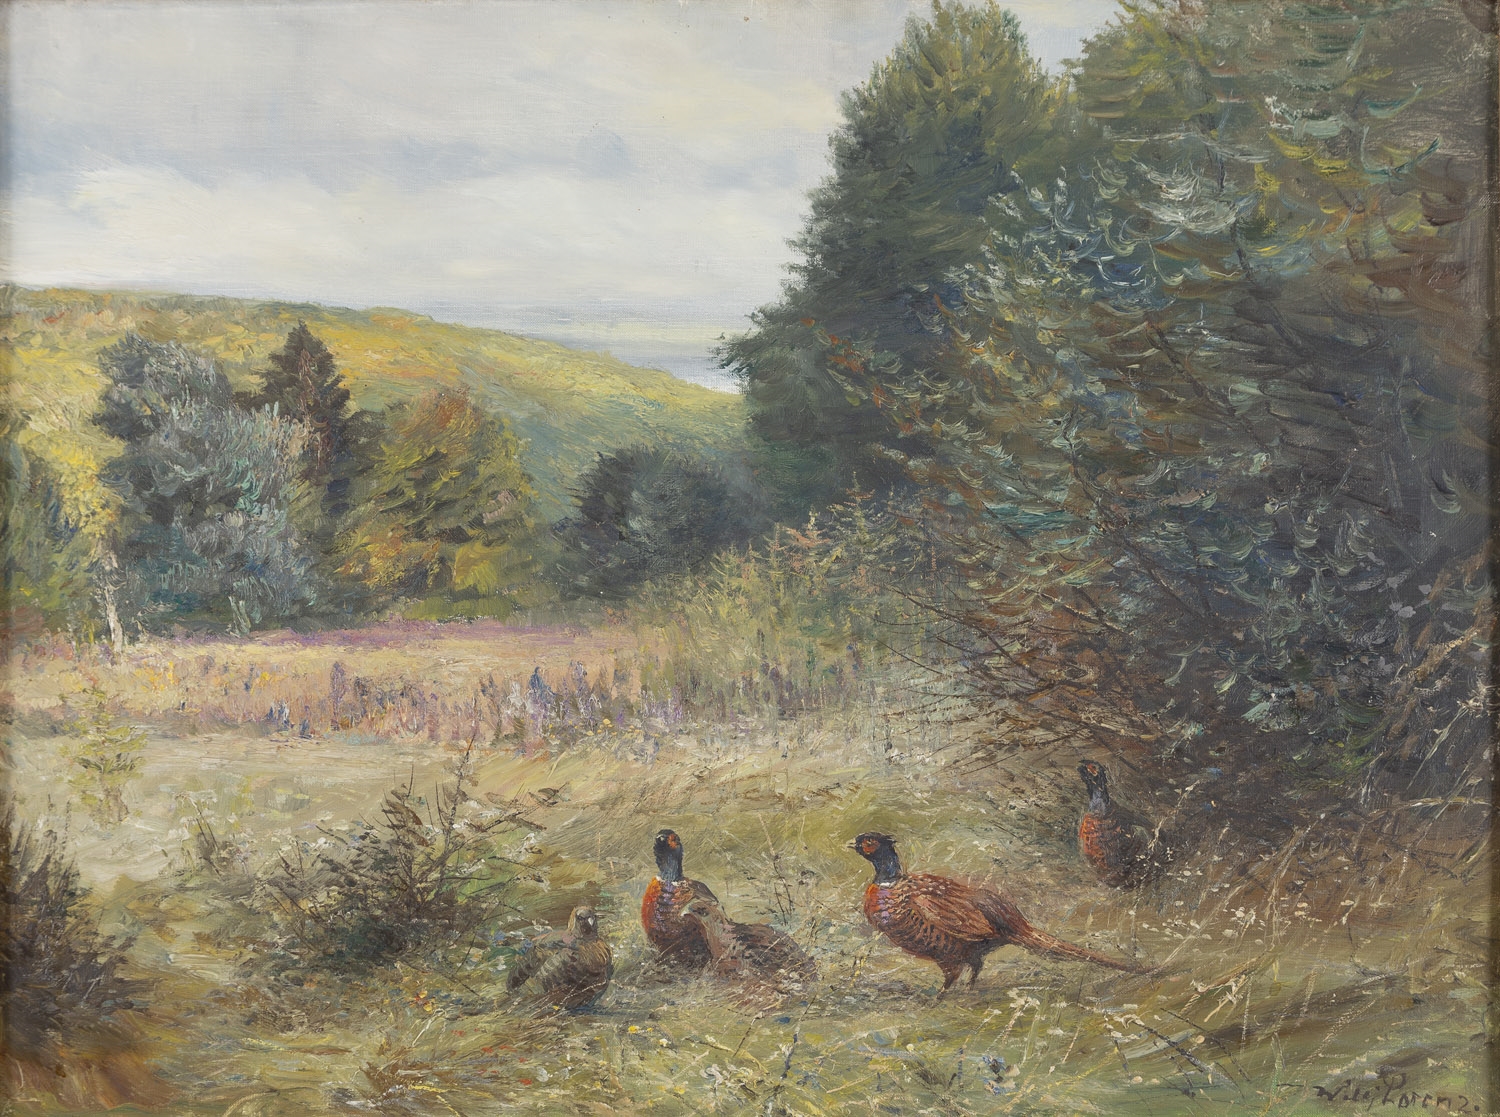 Pheasants on the edge of the forest - Wilhelm Lorenz